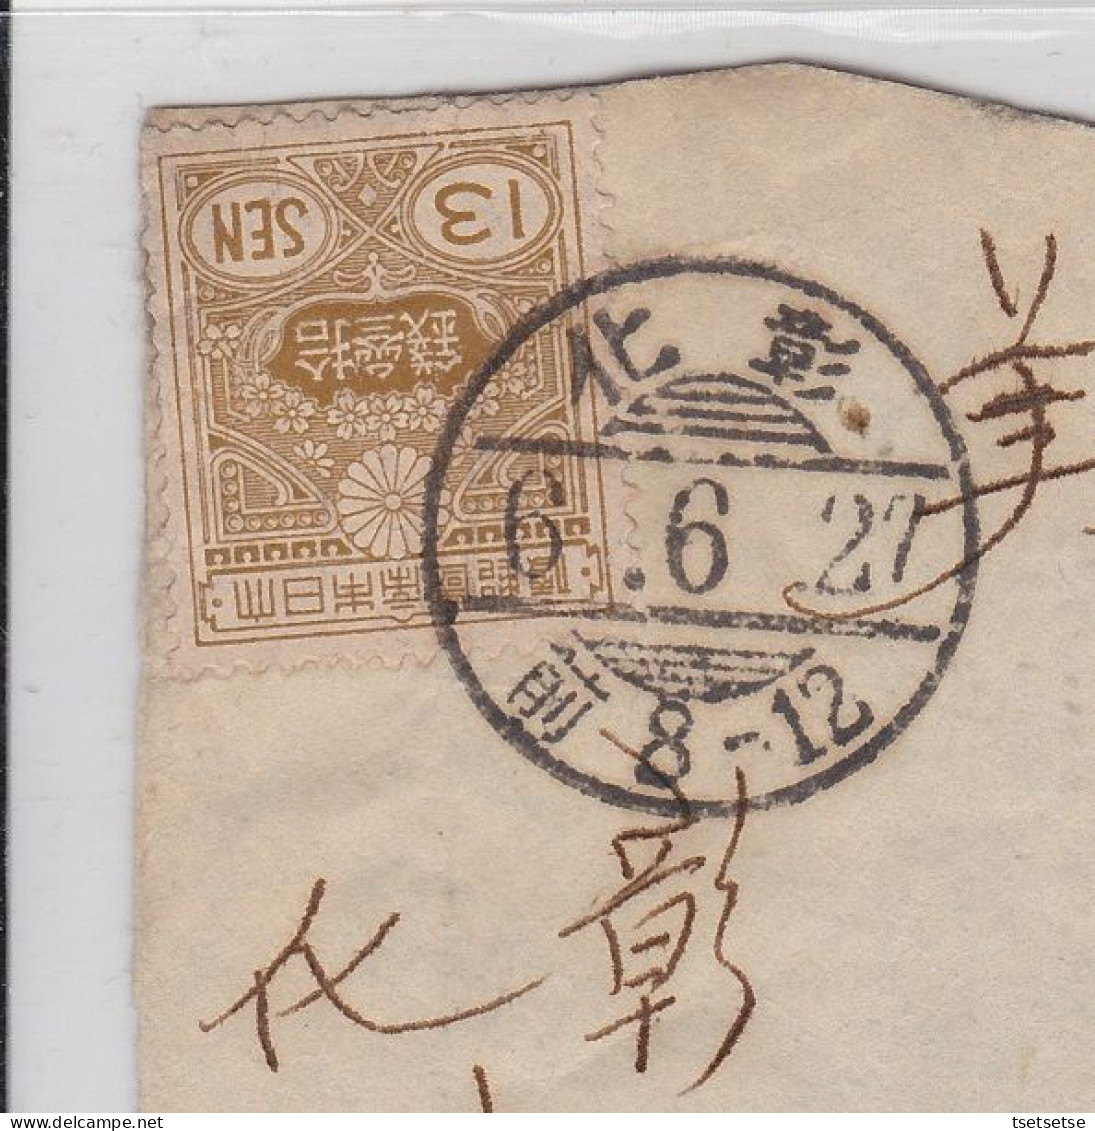 1917 Japan Occupy Taiwan Registered Letter, From Changhua ToTaipei, Bearing 13 Sen Imperial Japan Stamp - 1945 Japanse Bezetting